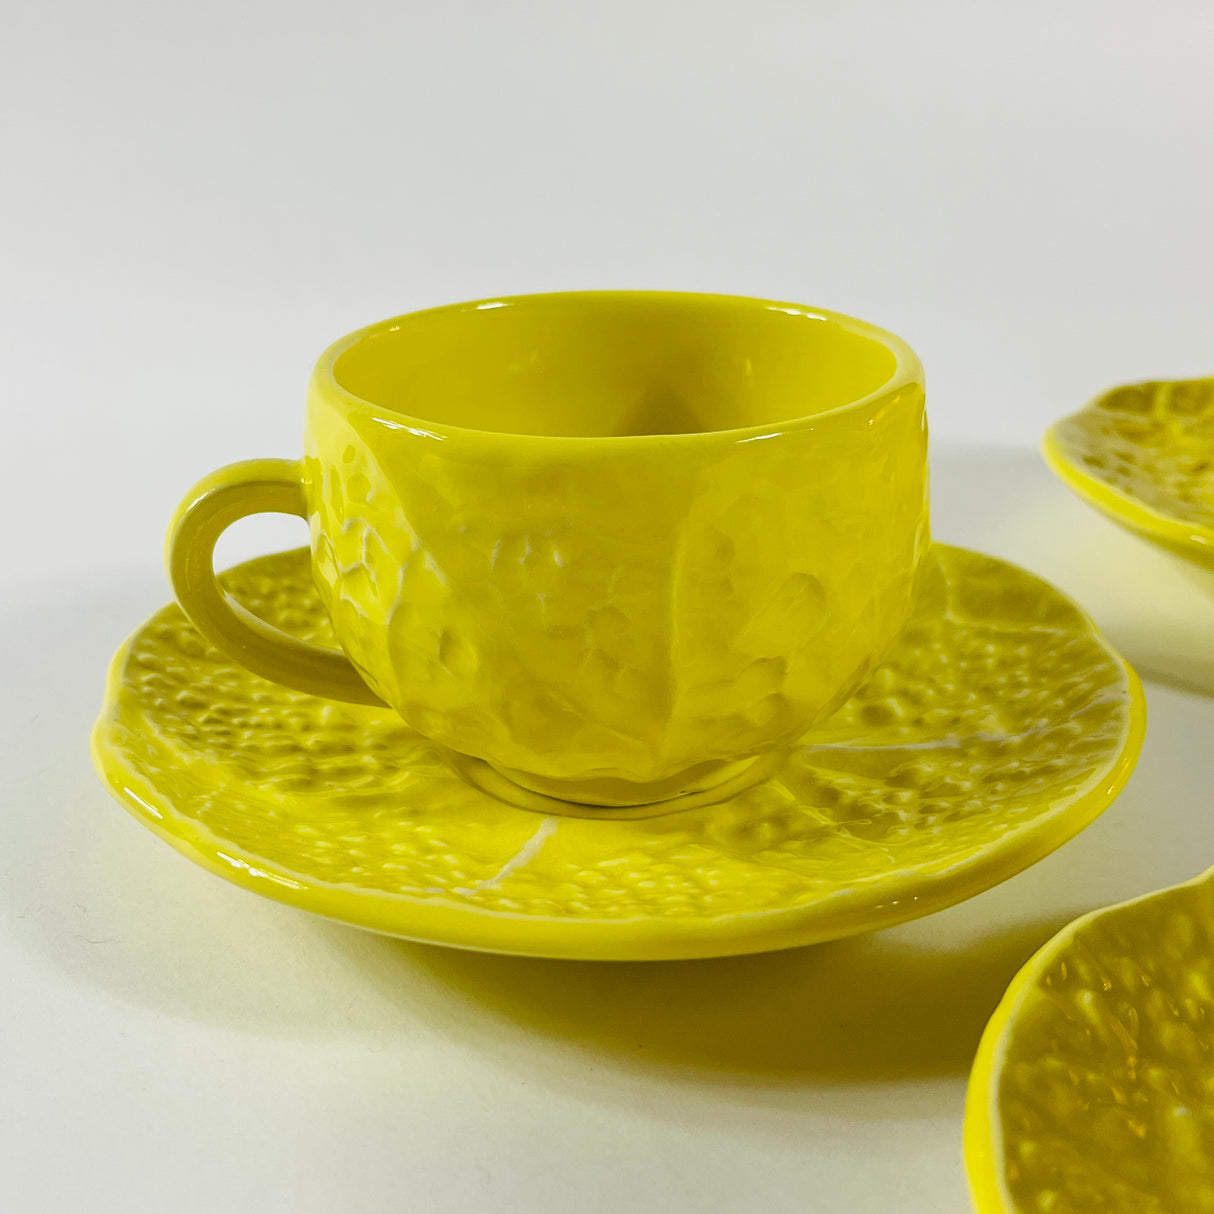 Portuguese Yellow Cabbage Cups and Saucers, Set of 4